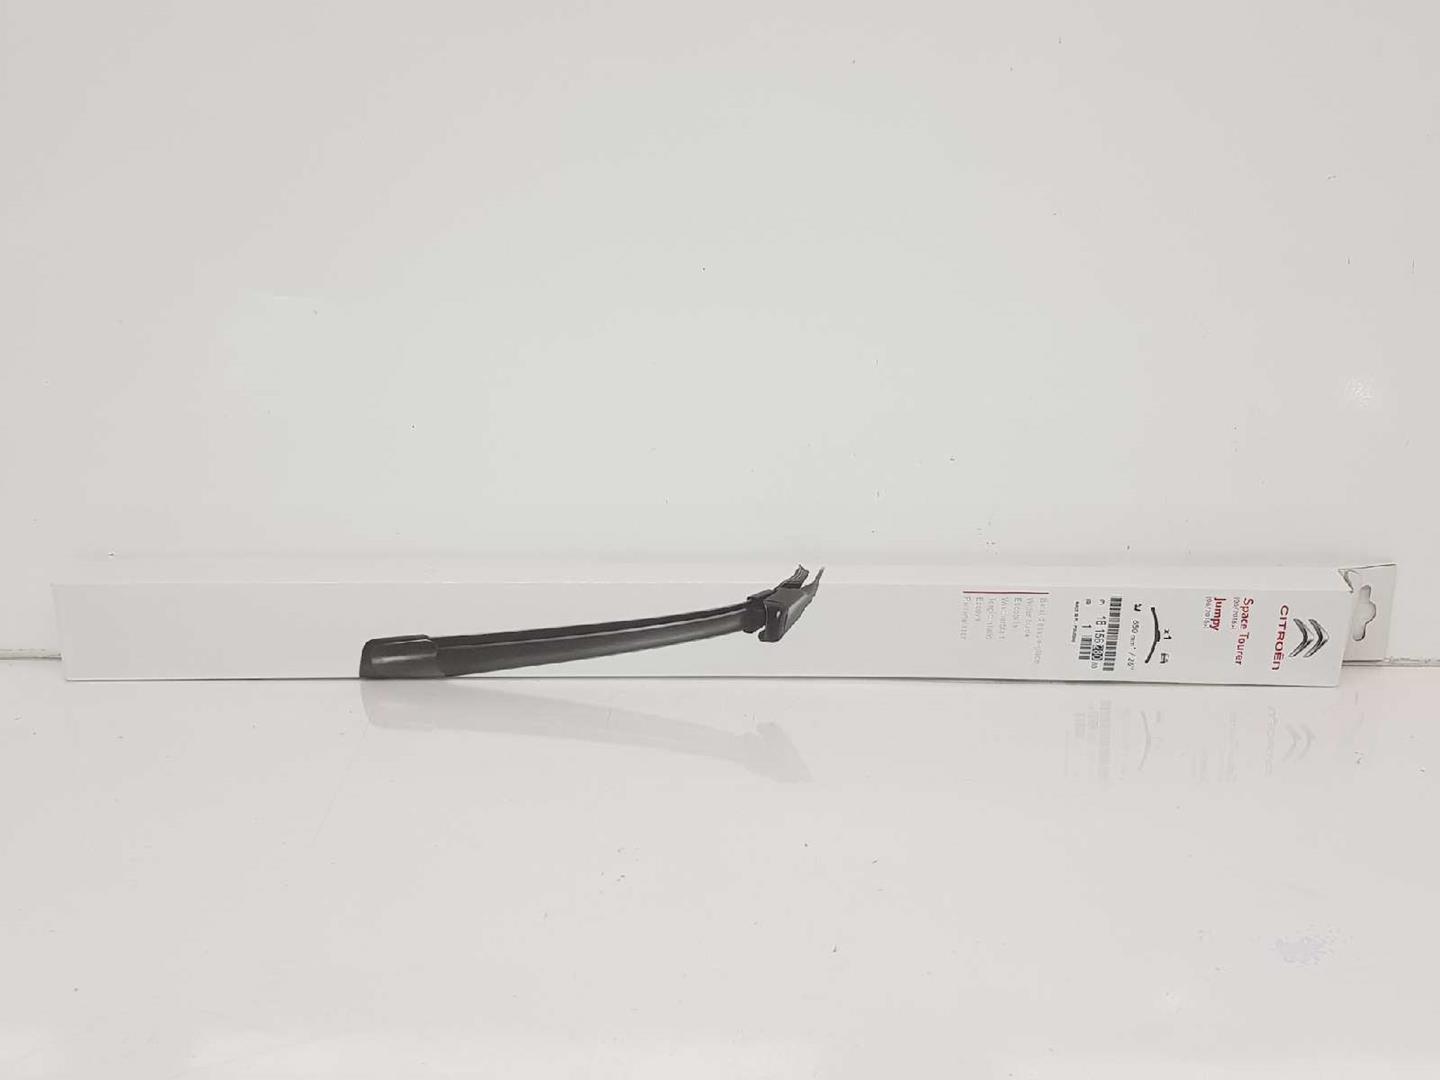 CITROËN Jumpy 2 generation (2007-2016) Front Wiper Arms 1615628080, 1615628080 24106477